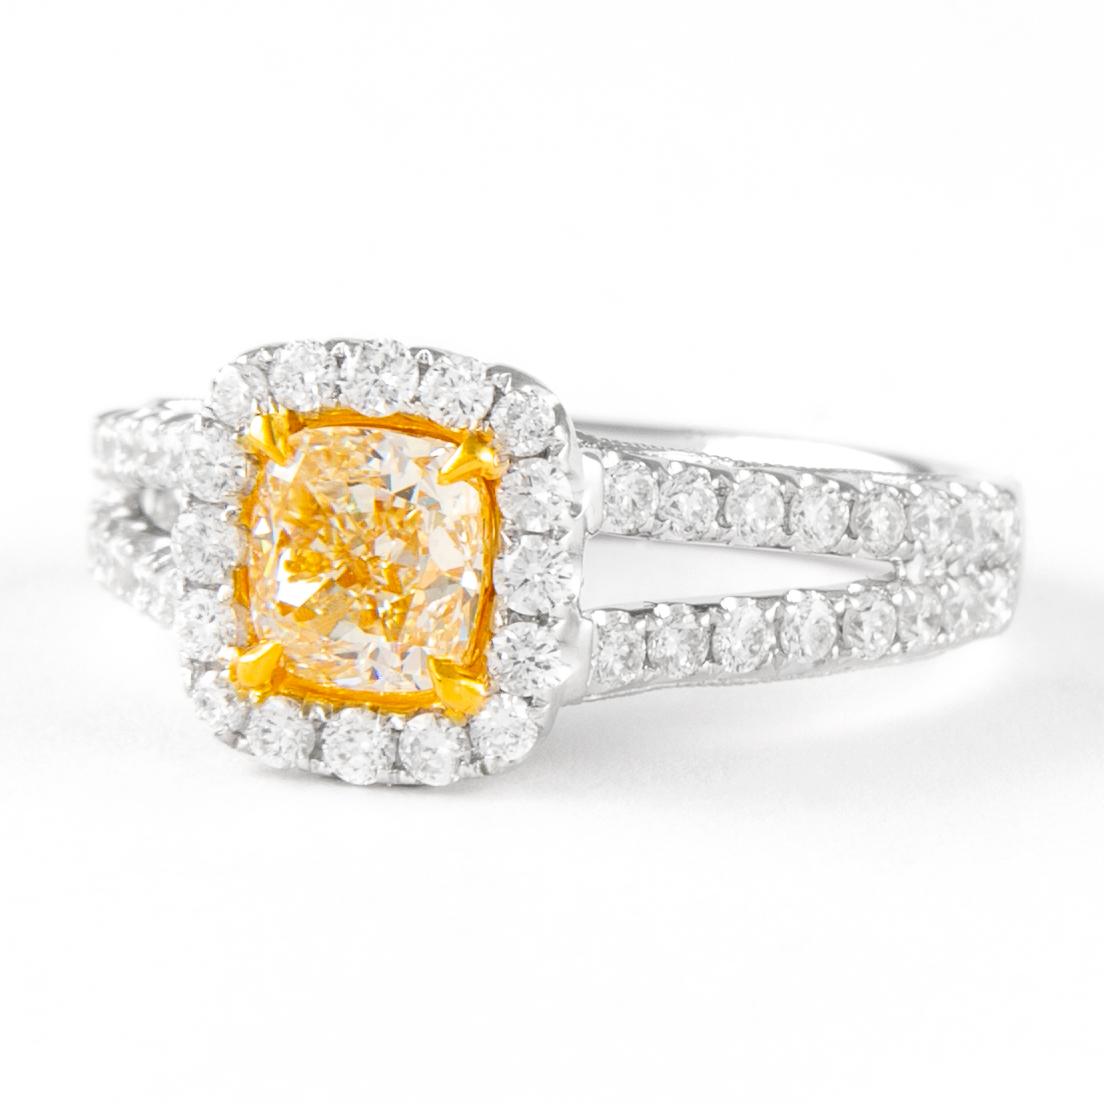 Contemporary Alexander 1.70ctt Fancy Light Yellow Cushion VS2 Diamond with Halo Ring 18k For Sale